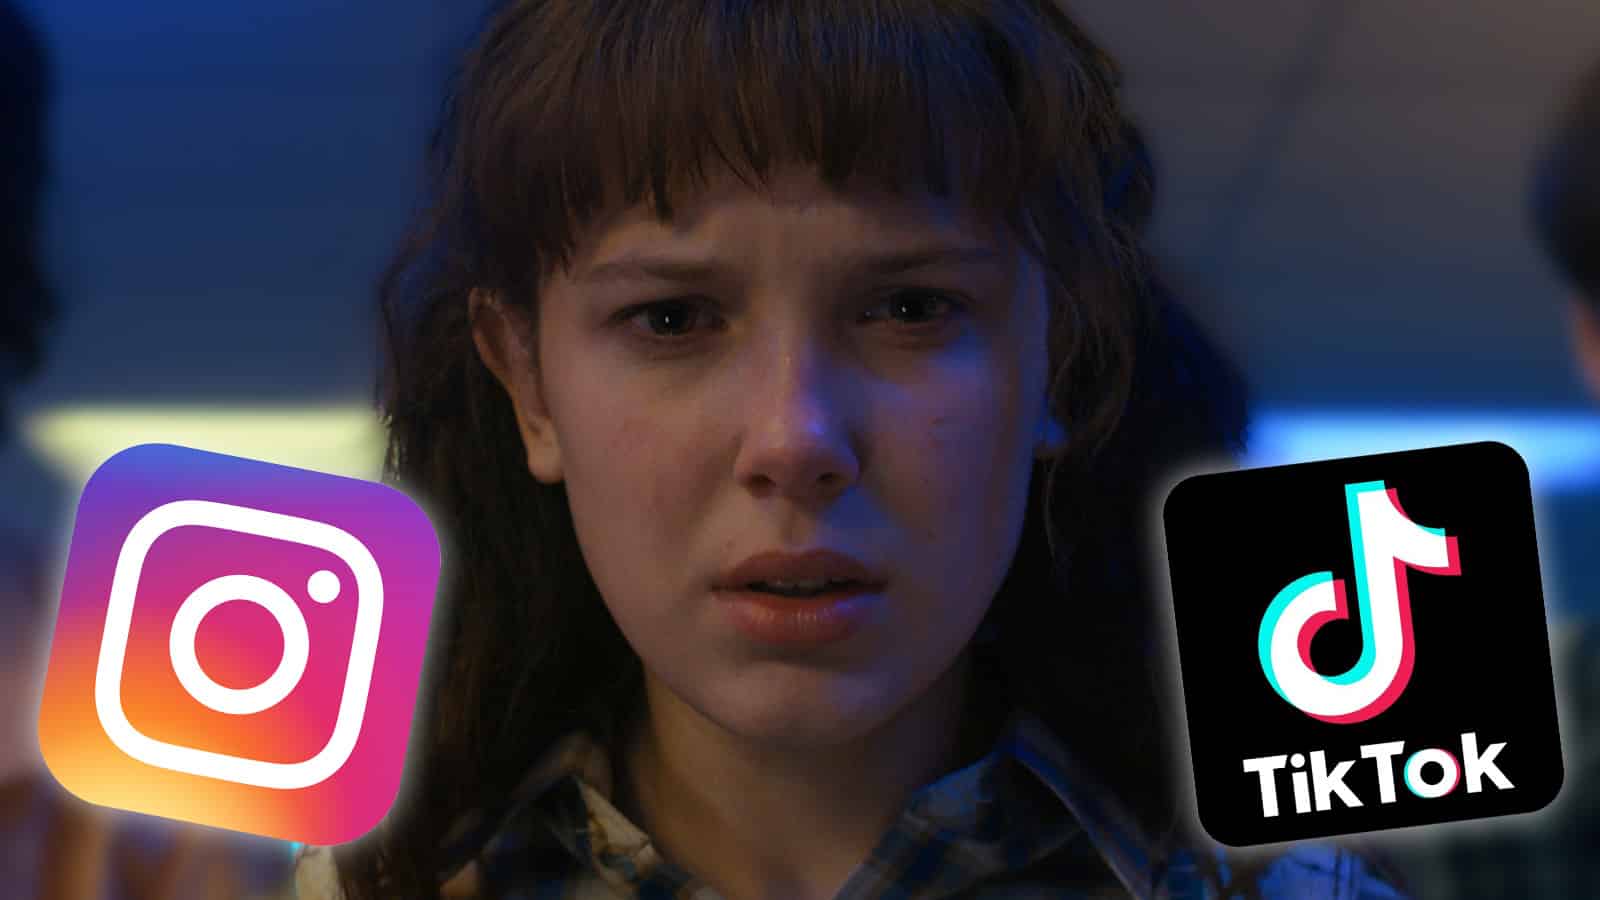 Millie Bobby Brown Is Ready To Say “Goodbye” To 'Stranger Things